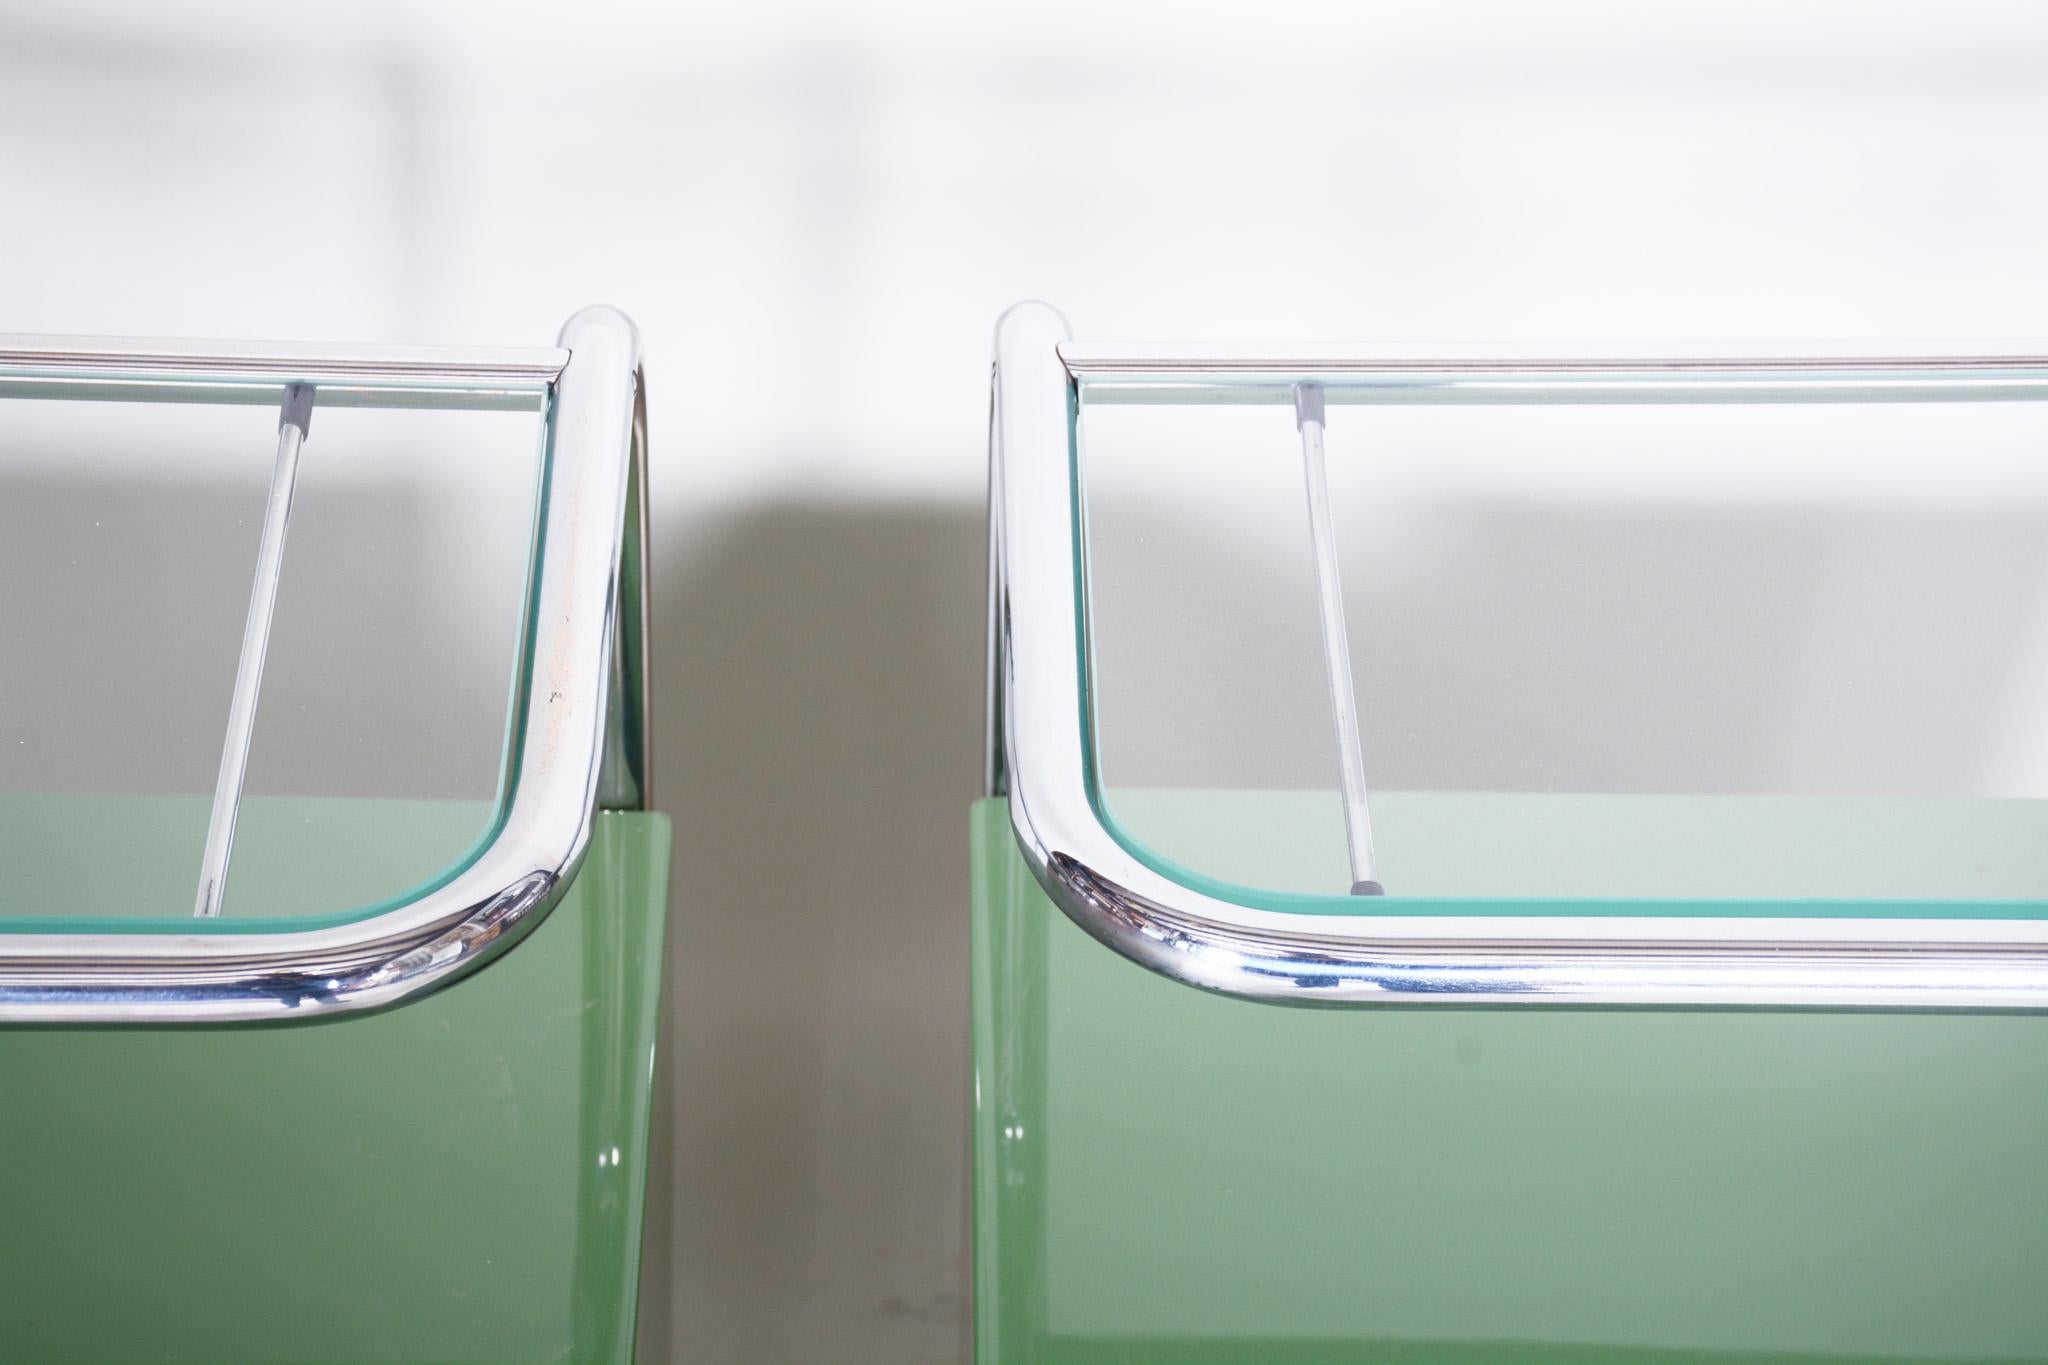 Pair of Green Vintage Bauhaus Bed Side Tables, Vichr, 1930s Glass Removable Desk 1